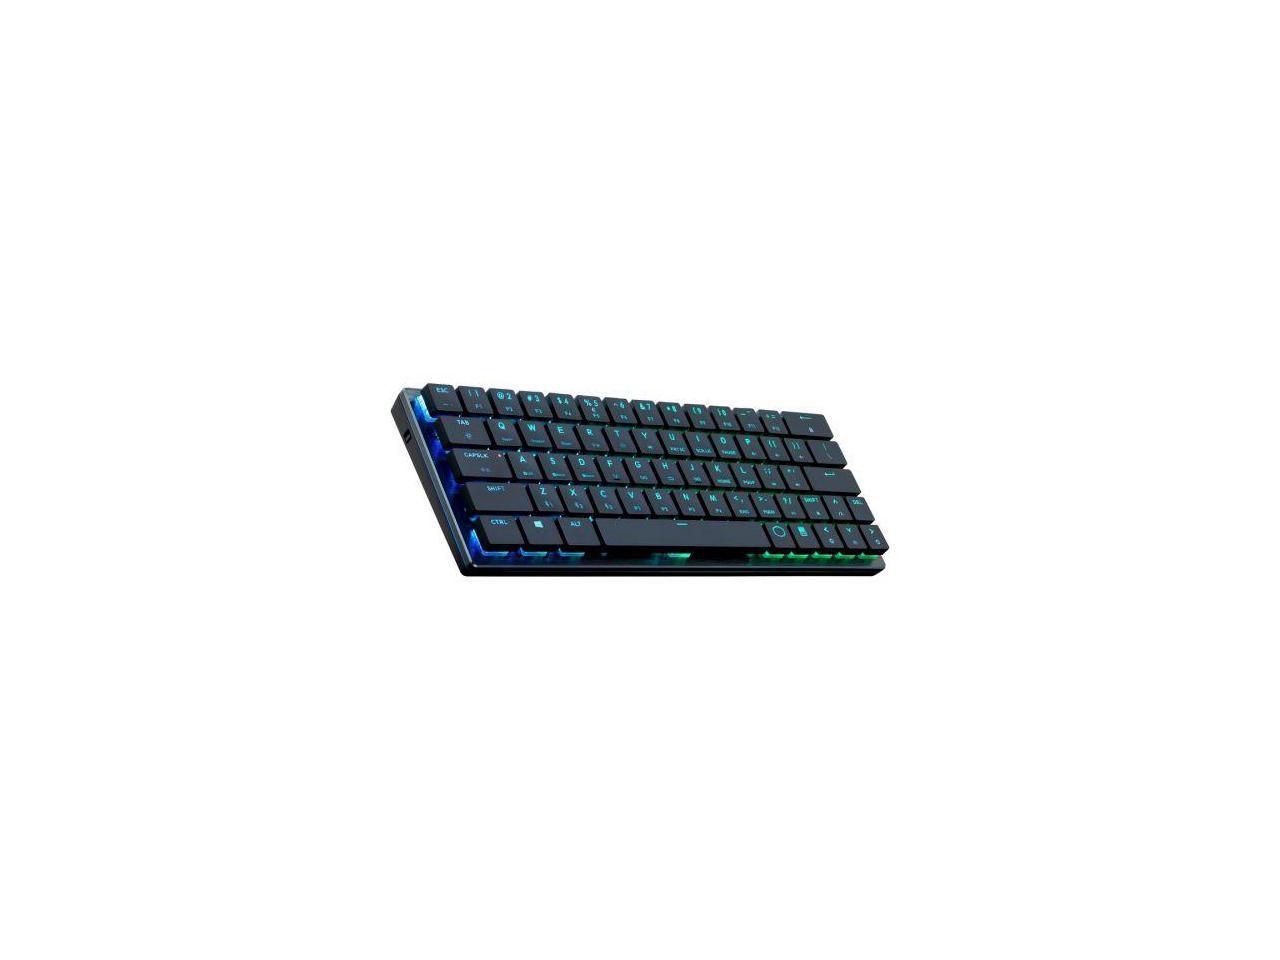 Cooler Master - SK-621-GKLR1-US - Cooler Master SK621 Keyboard - Wired/Wireless Connectivity - Bluetooth - USB Type C